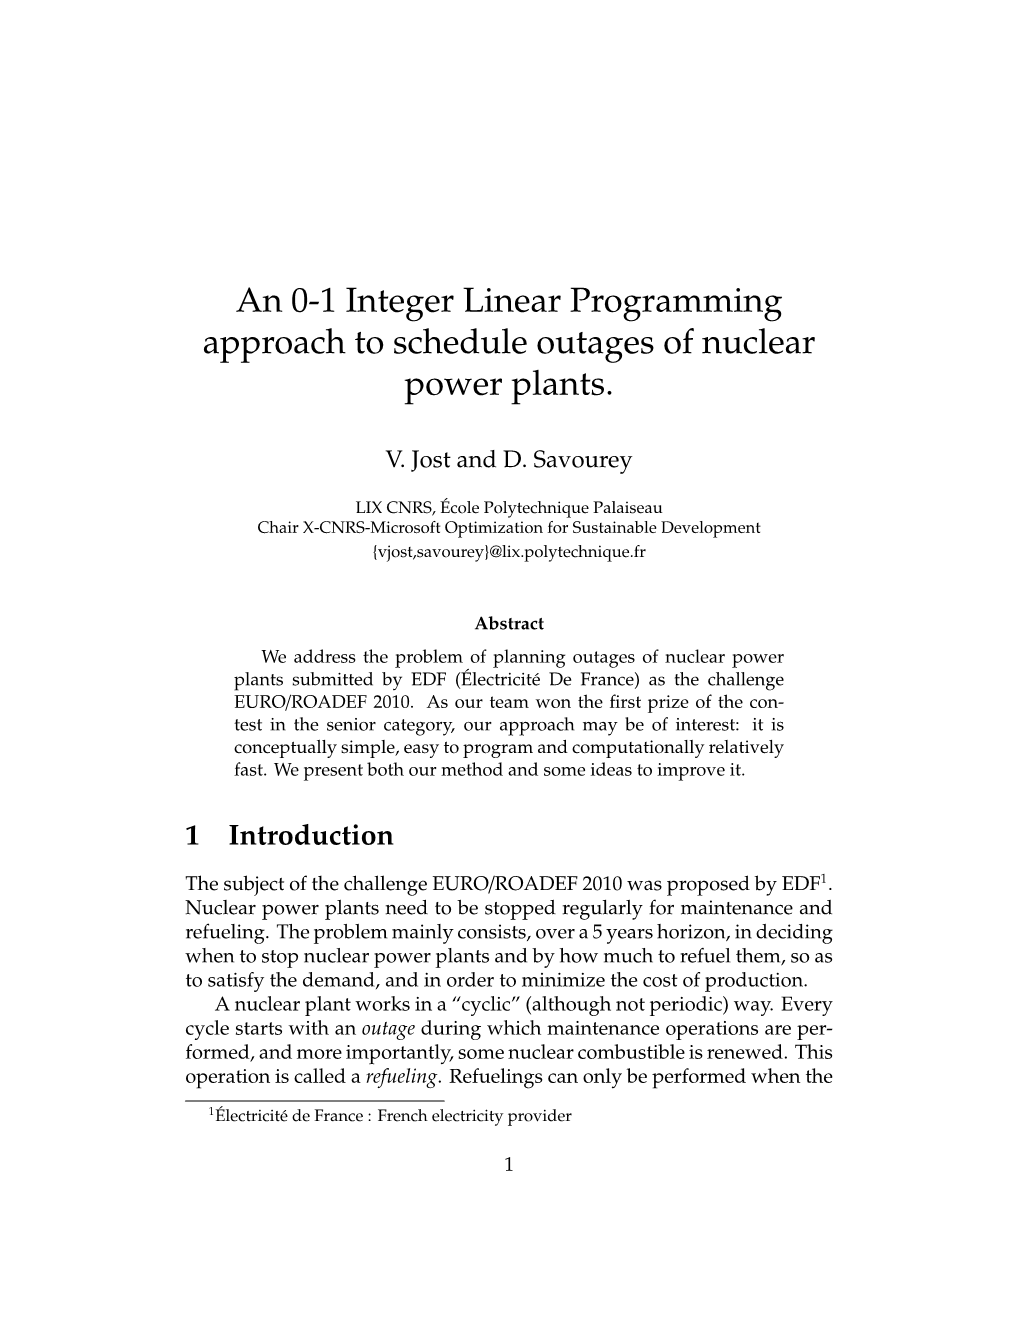 An 0-1 Integer Linear Programming Approach to Schedule Outages of Nuclear Power Plants